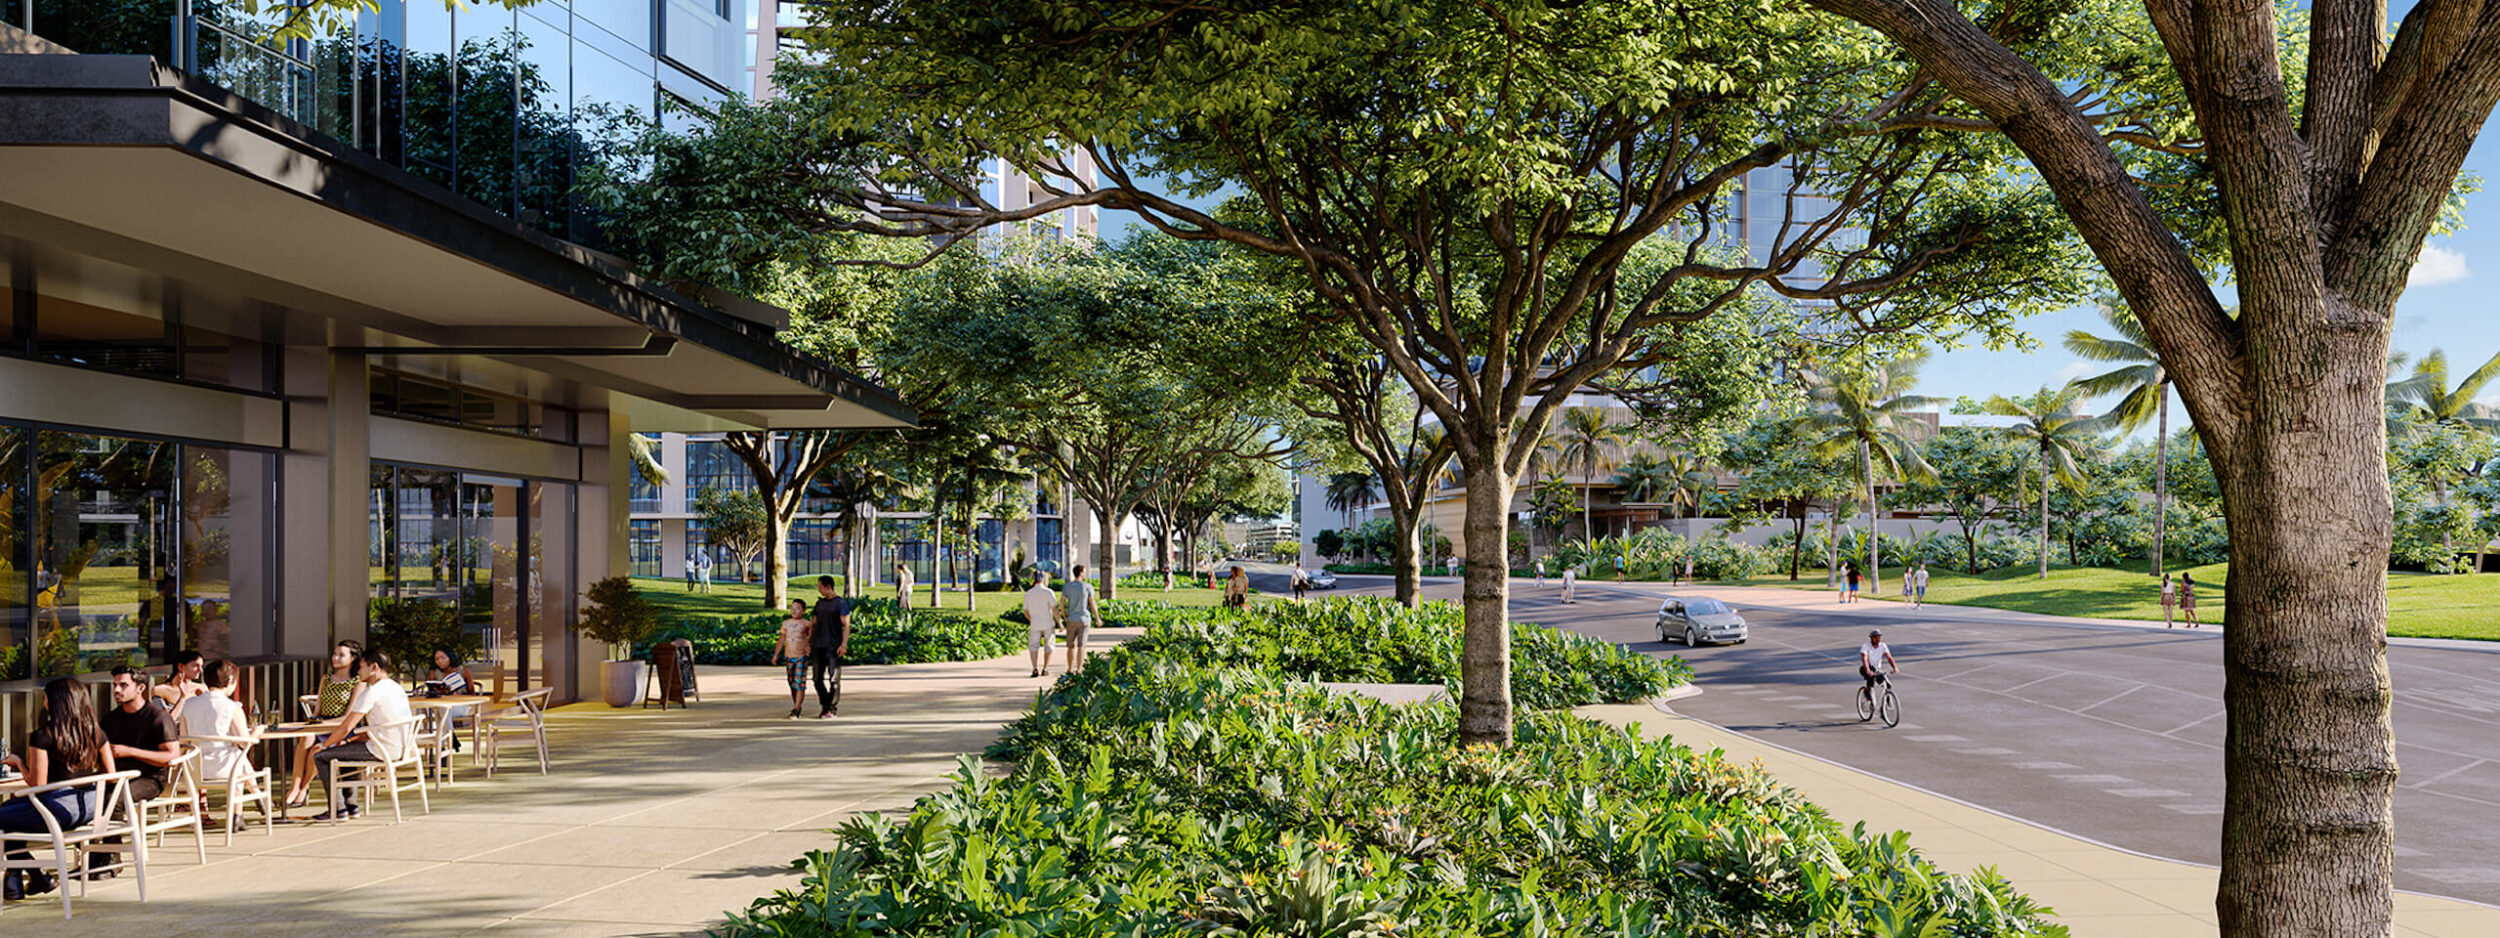 Proposed landscaping along Auahi Street.